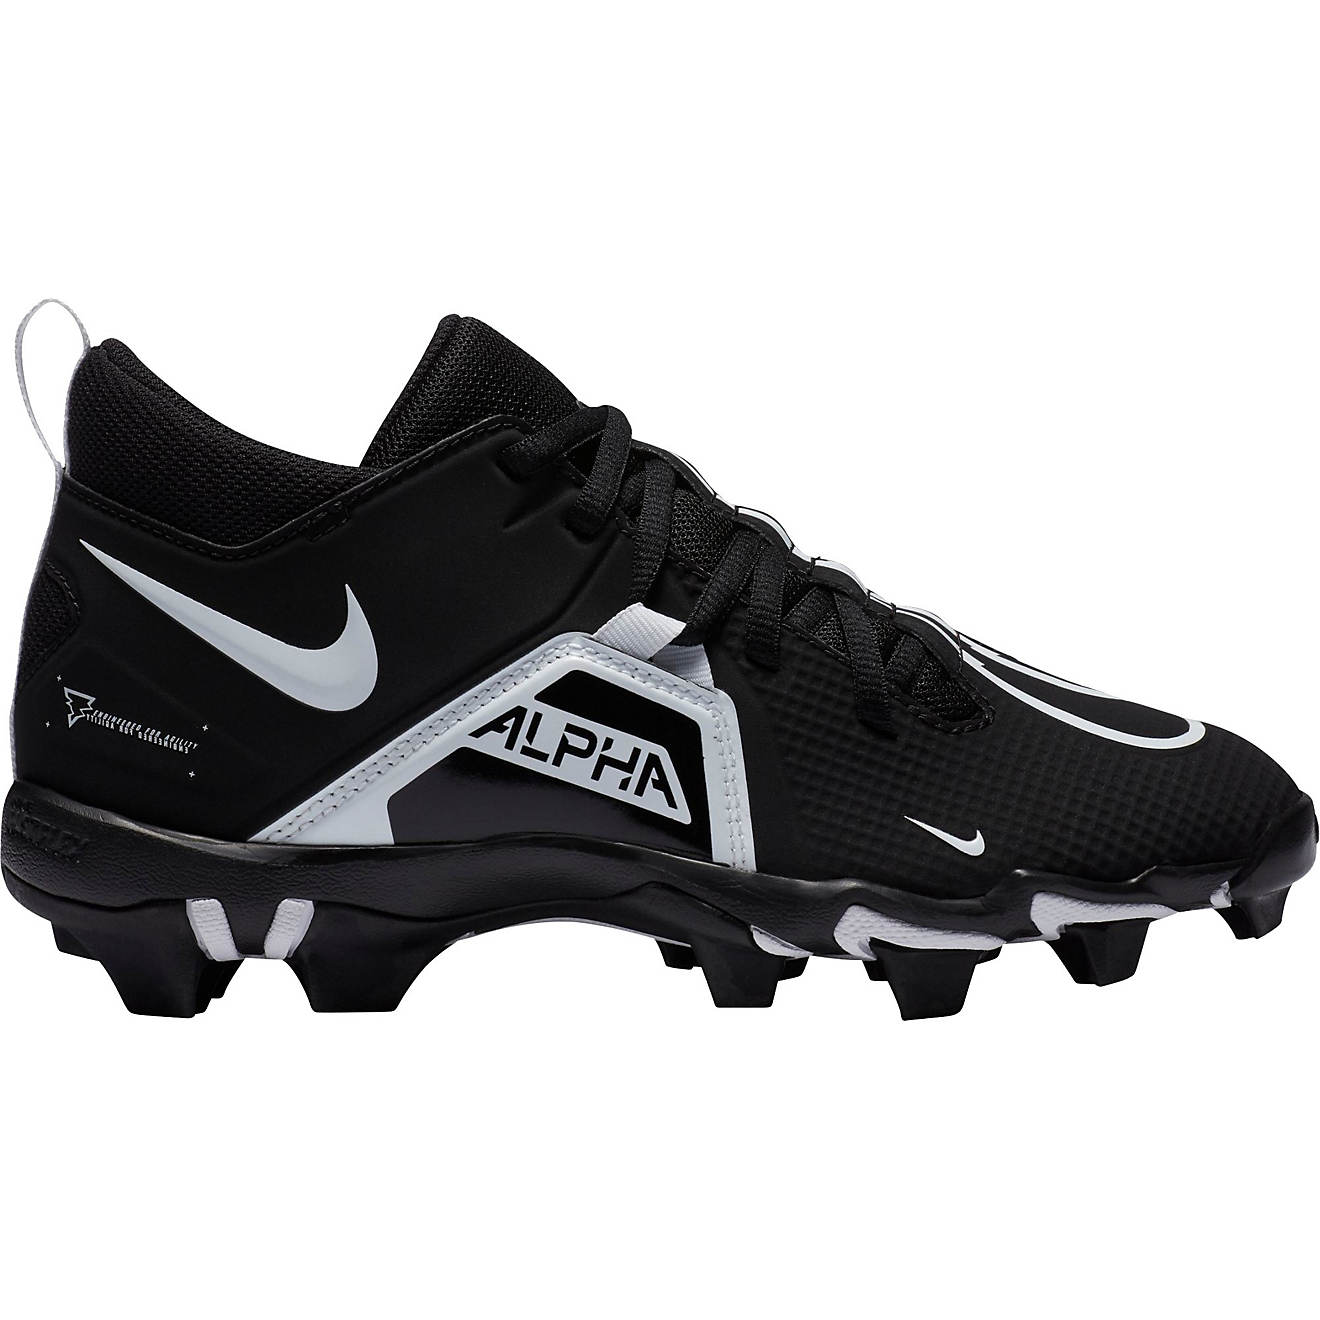 Nike Boys' Alpha Menace 3 Shark BG Football Cleats - view number 3 on Sale At Academy Sports + Outdoors